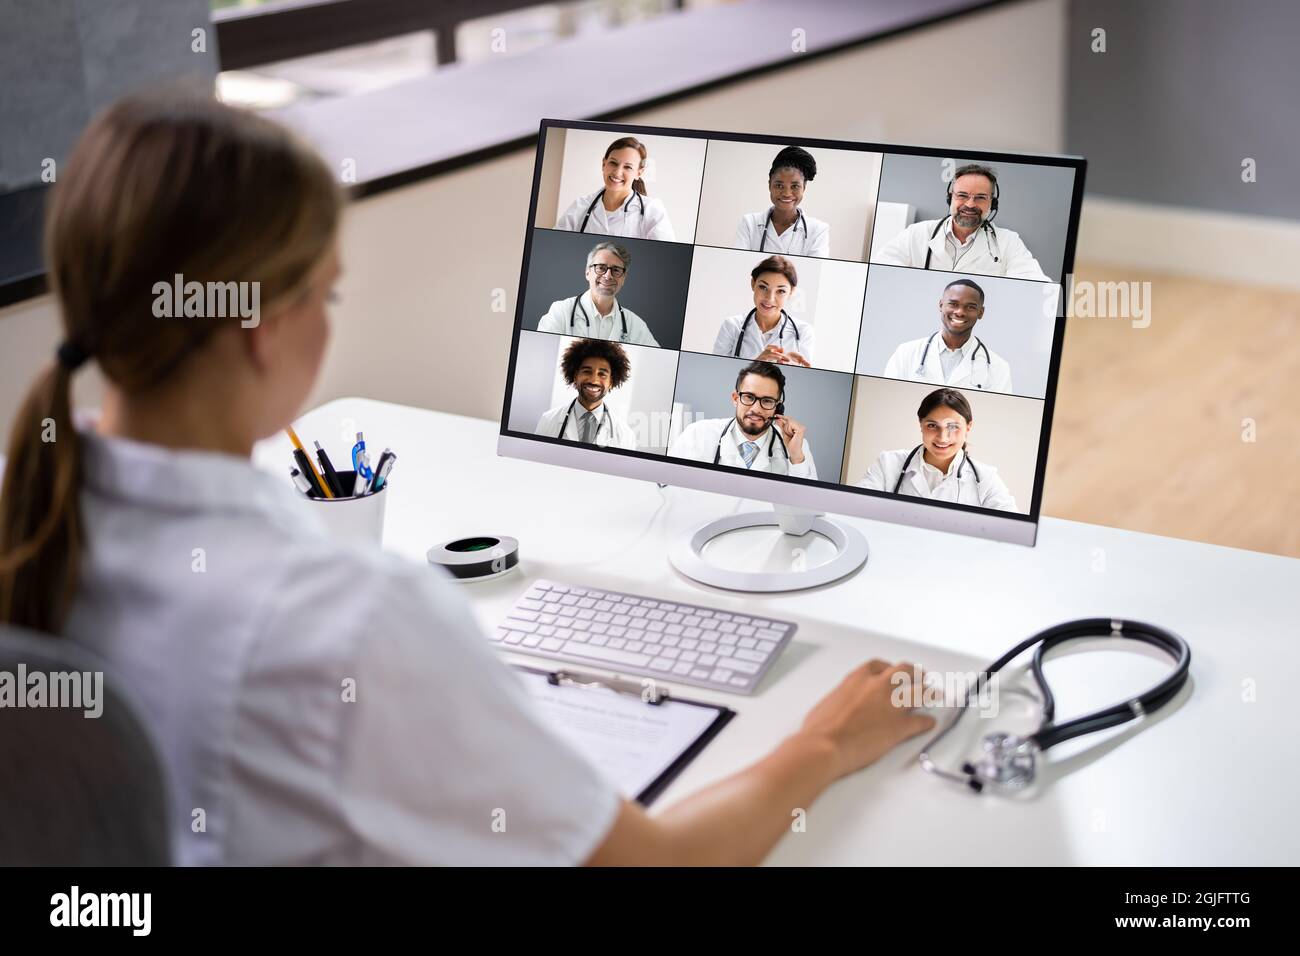 Doctor In Online Medical Video Conference With Diverse Team Of Hospital Workers Stock Photo